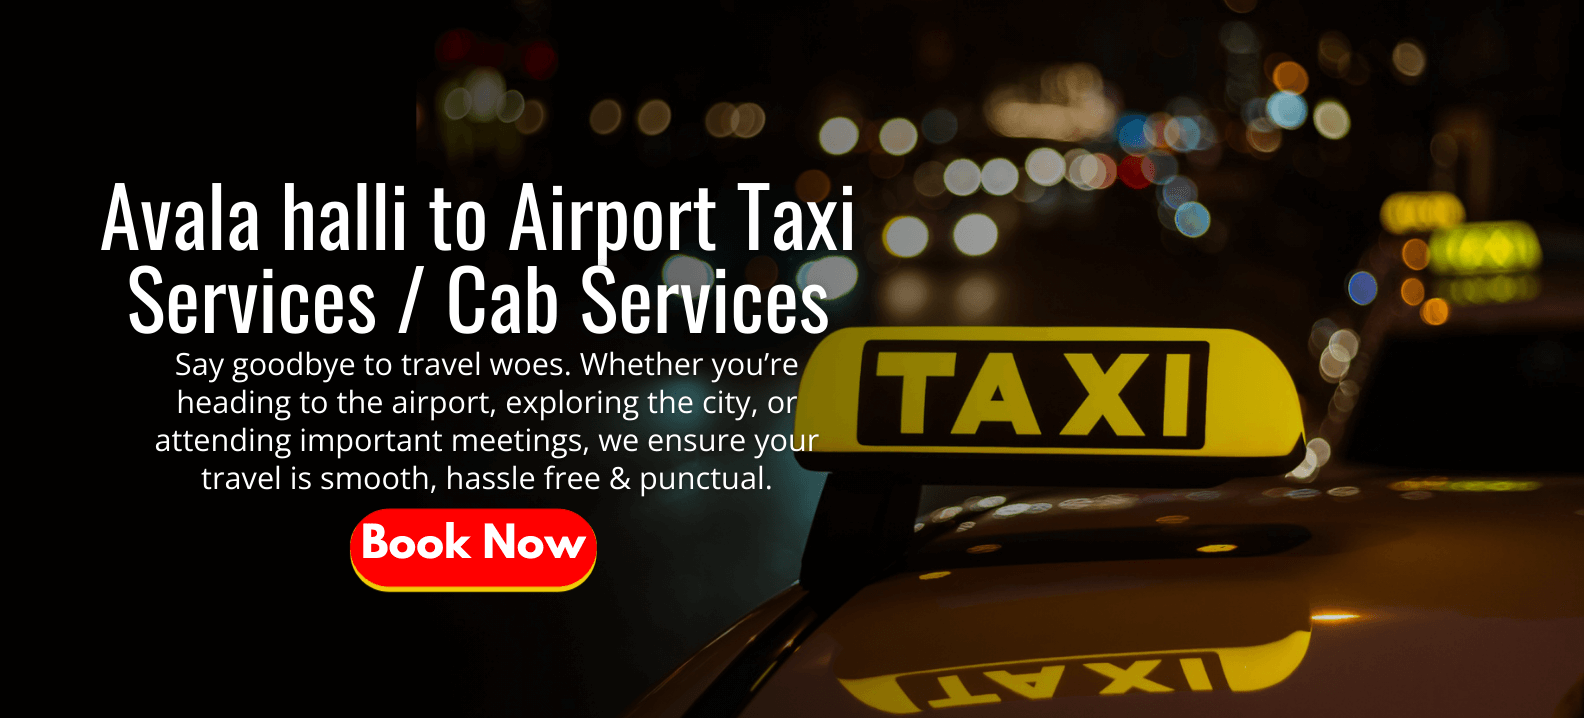 Avala halli to Airport Taxi Services _ Cab Services